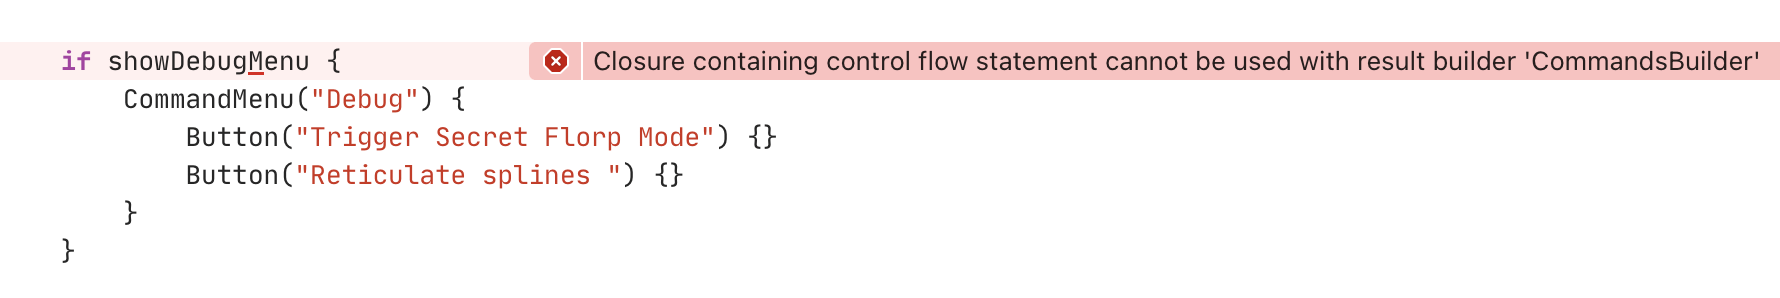 Closure containing control flow statement cannot be used with result builder 'CommandsBuilder'